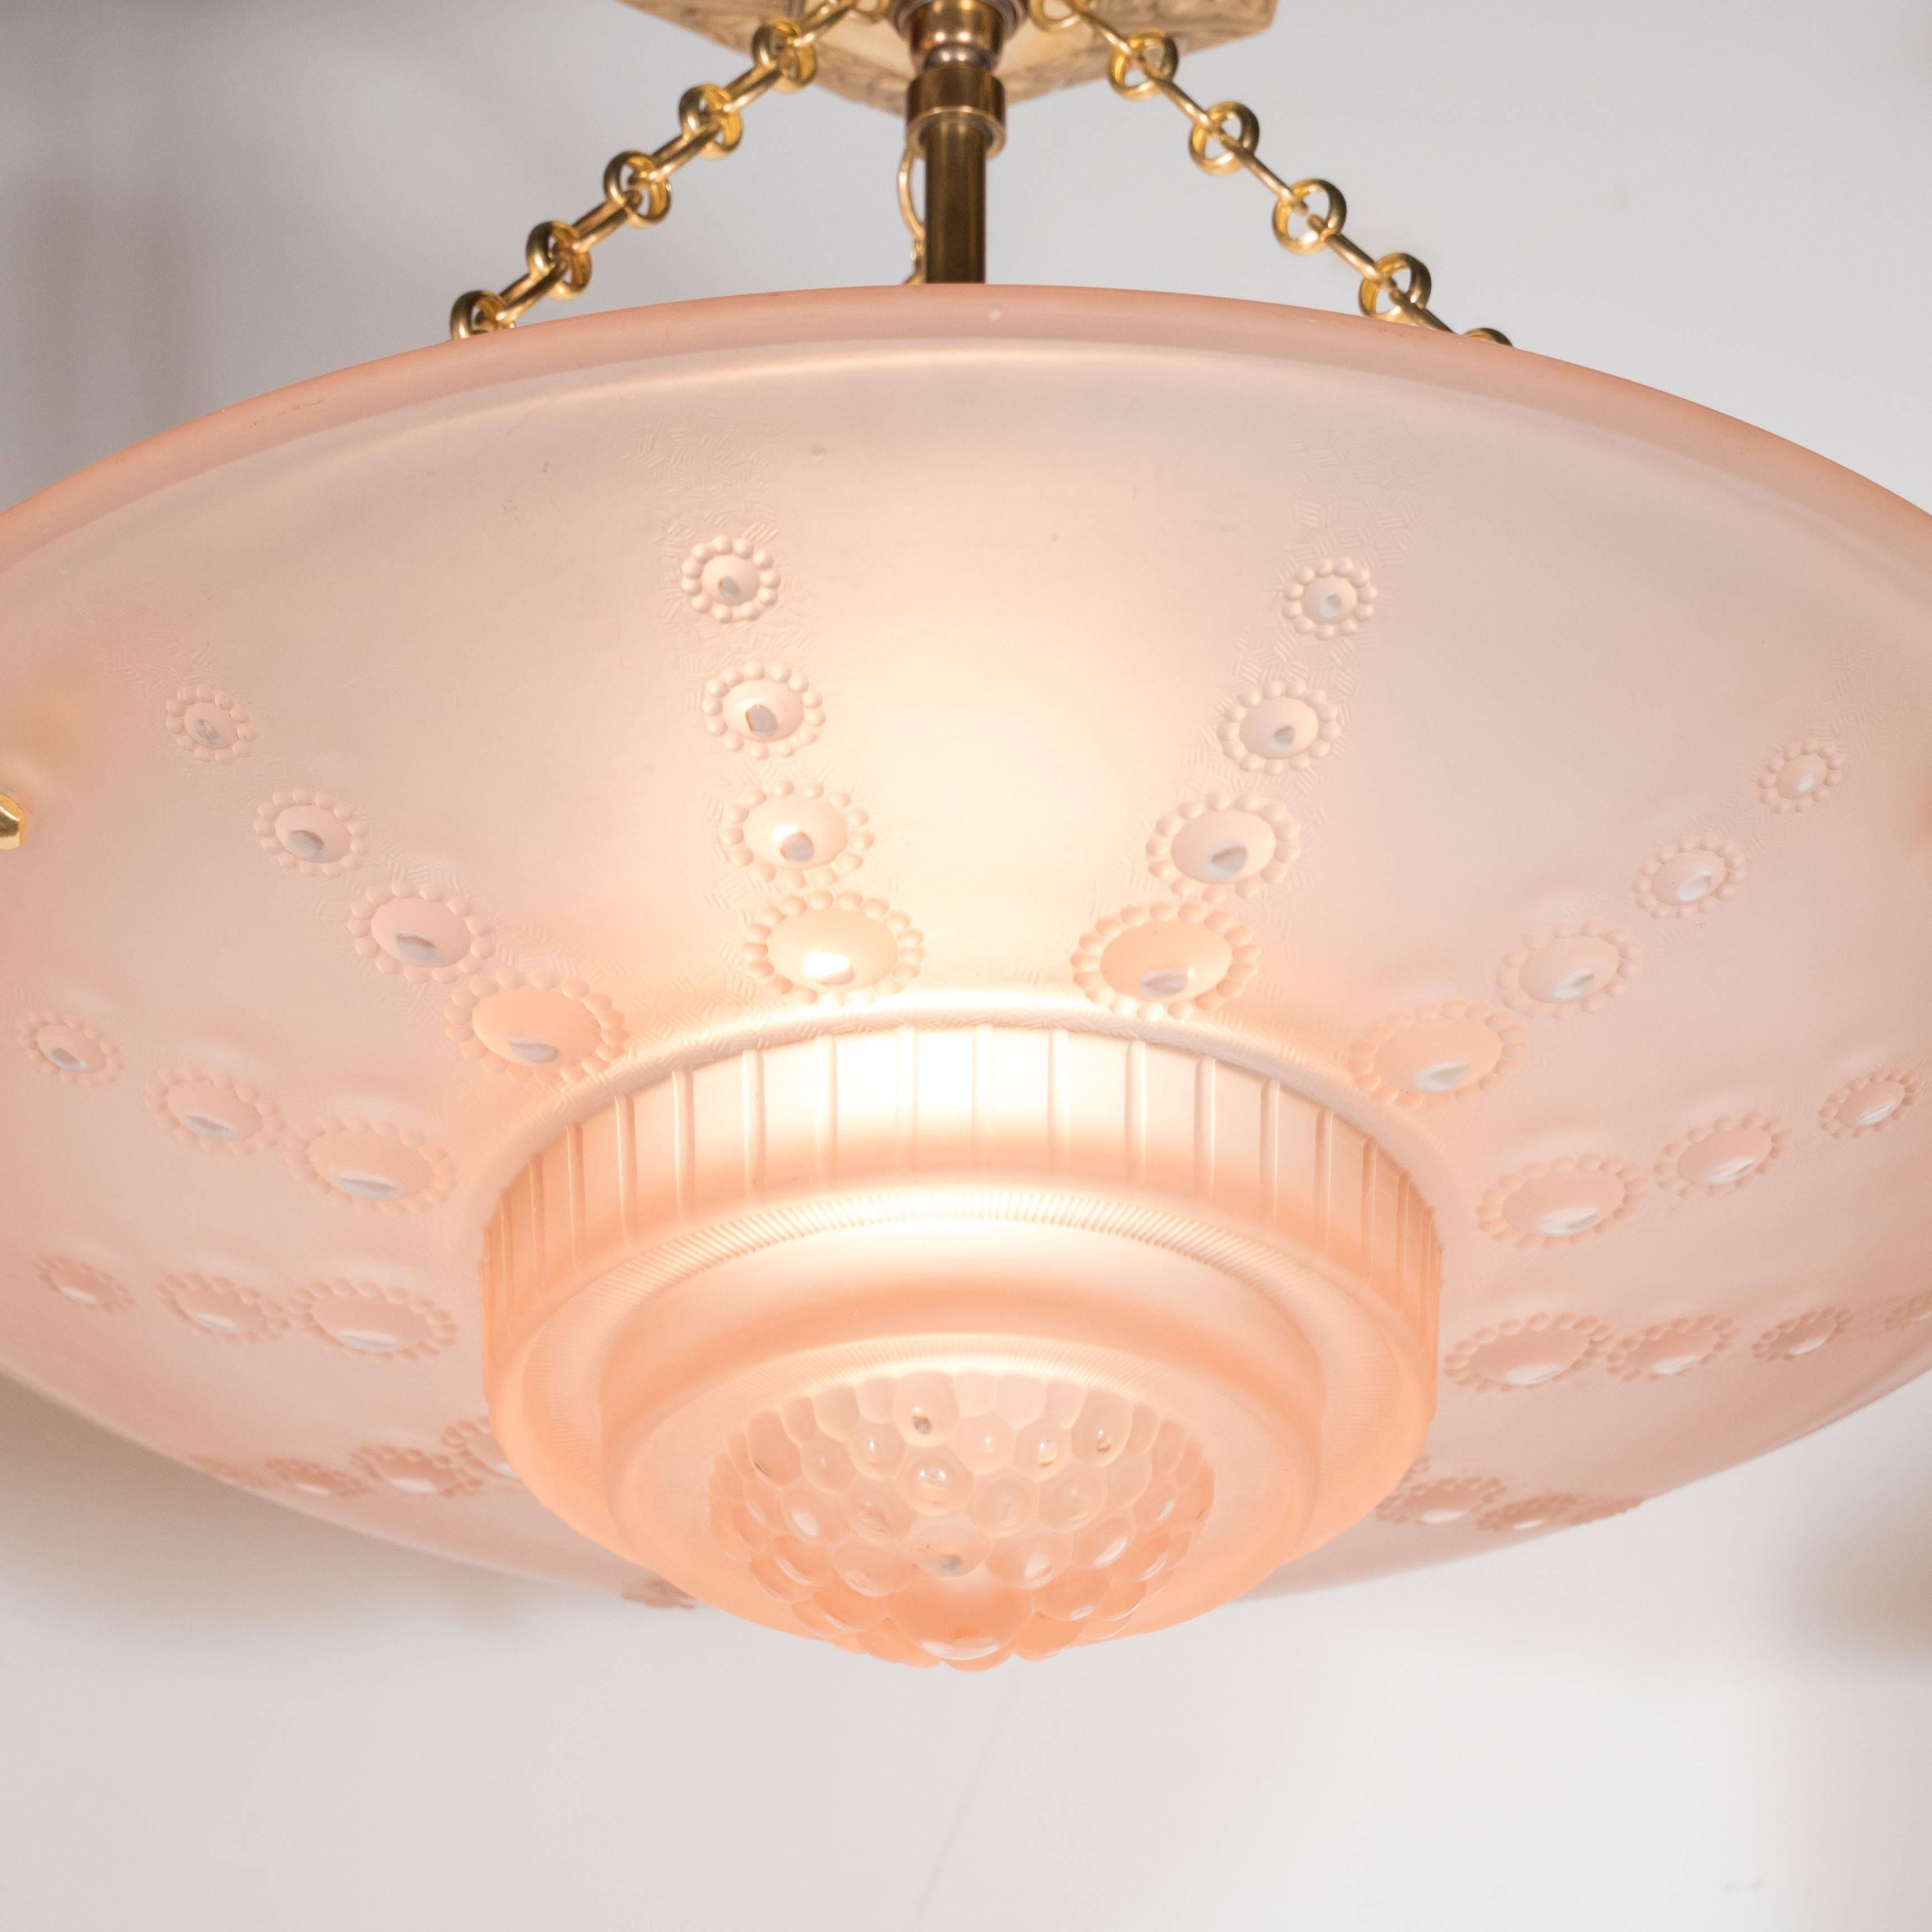 A French Art Deco inverted dome chandelier by Georges Leleu in frosted rose colored glass decorated with a repeated circular design ascending in size towards the center. It has delicate cross-hatch etching, beading and ridge detailing throughout.